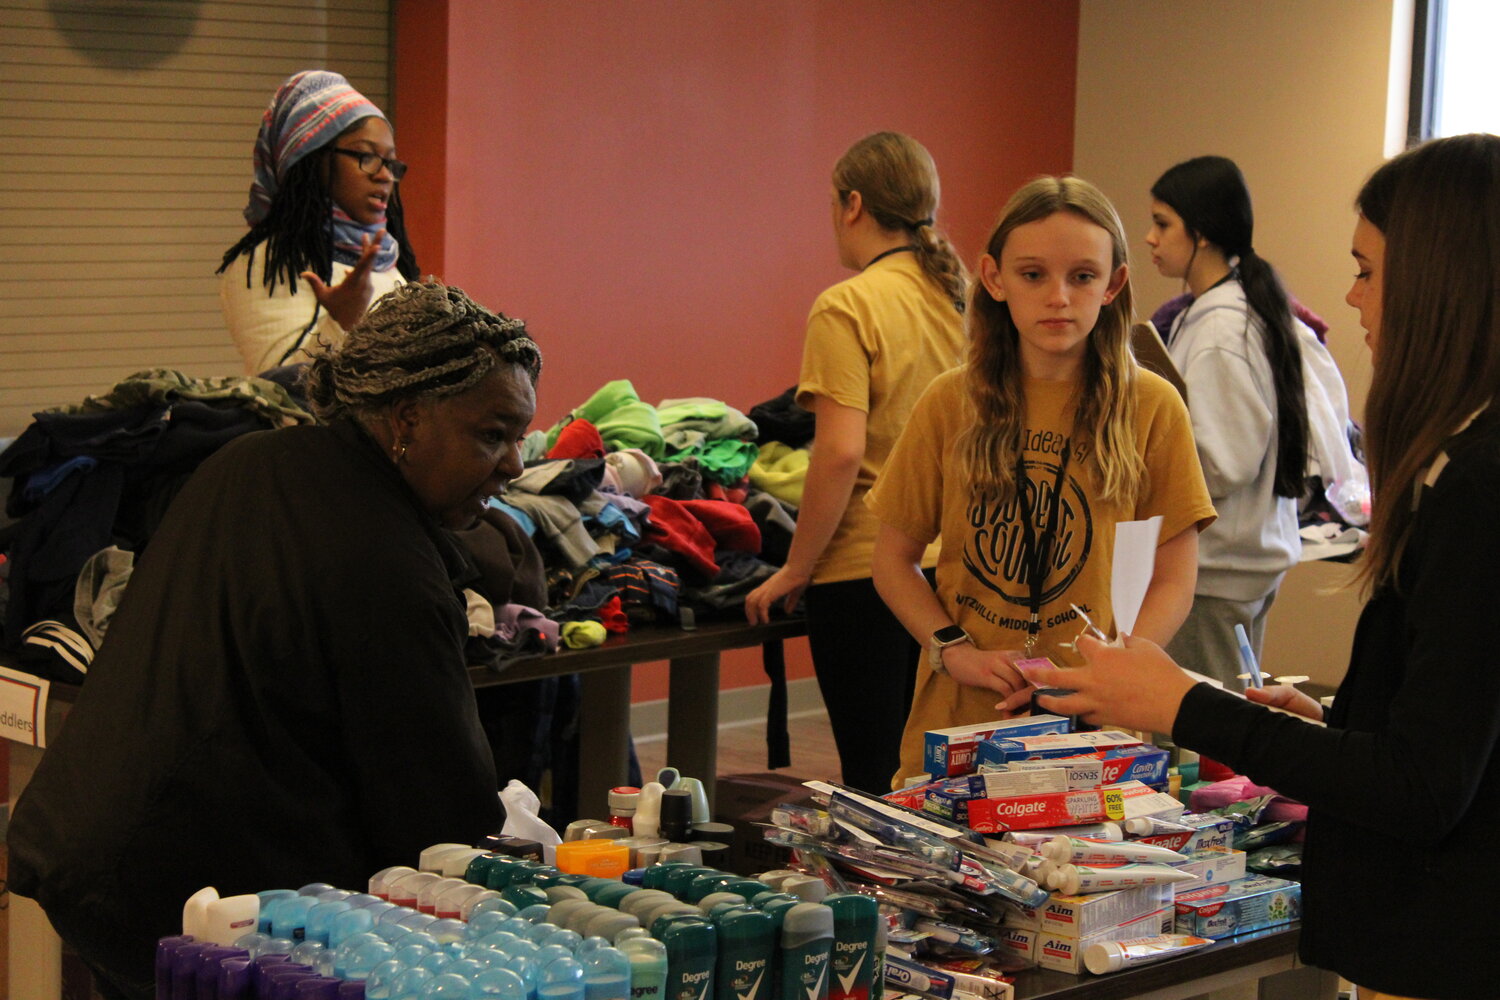 Two Wentzville Middle School students help a person through the line of donations.